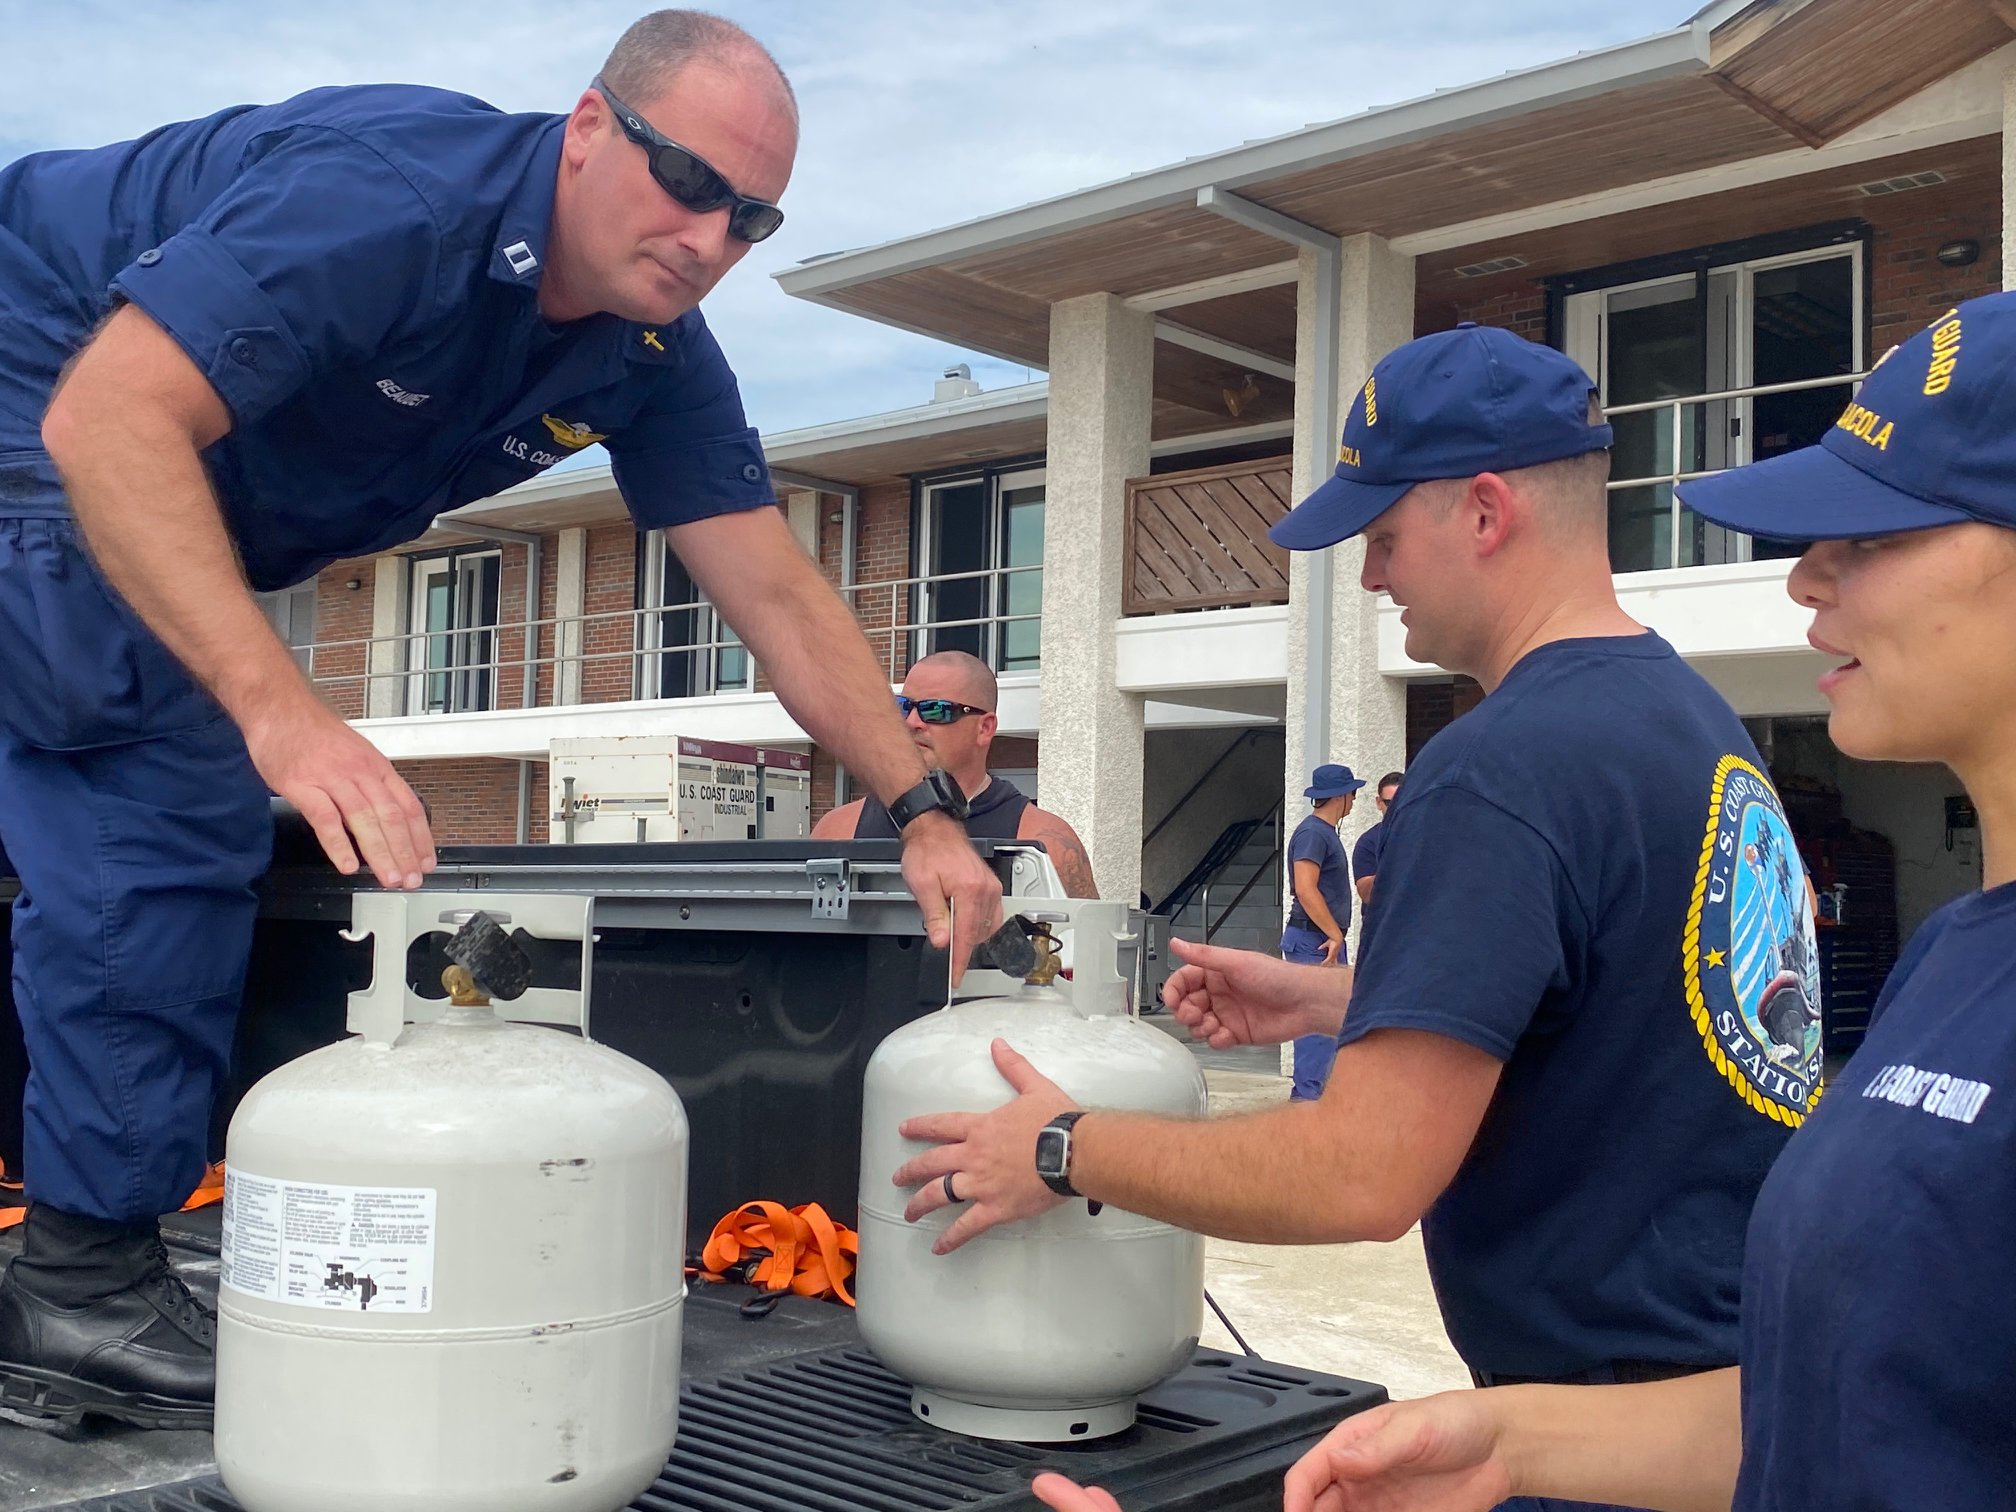 Command Master Chief Zachary Ayres, Chaplains Lt. Mark Beaudet and Lt. Doyle Allen, all of Sector Mobile, provided meals ready to eat (MRE), water bottles, and propane tanks to Coast Guard Station Pensacola after the unit was damaged and lost power during Hurricane Sally, Sept. 18, 2020.